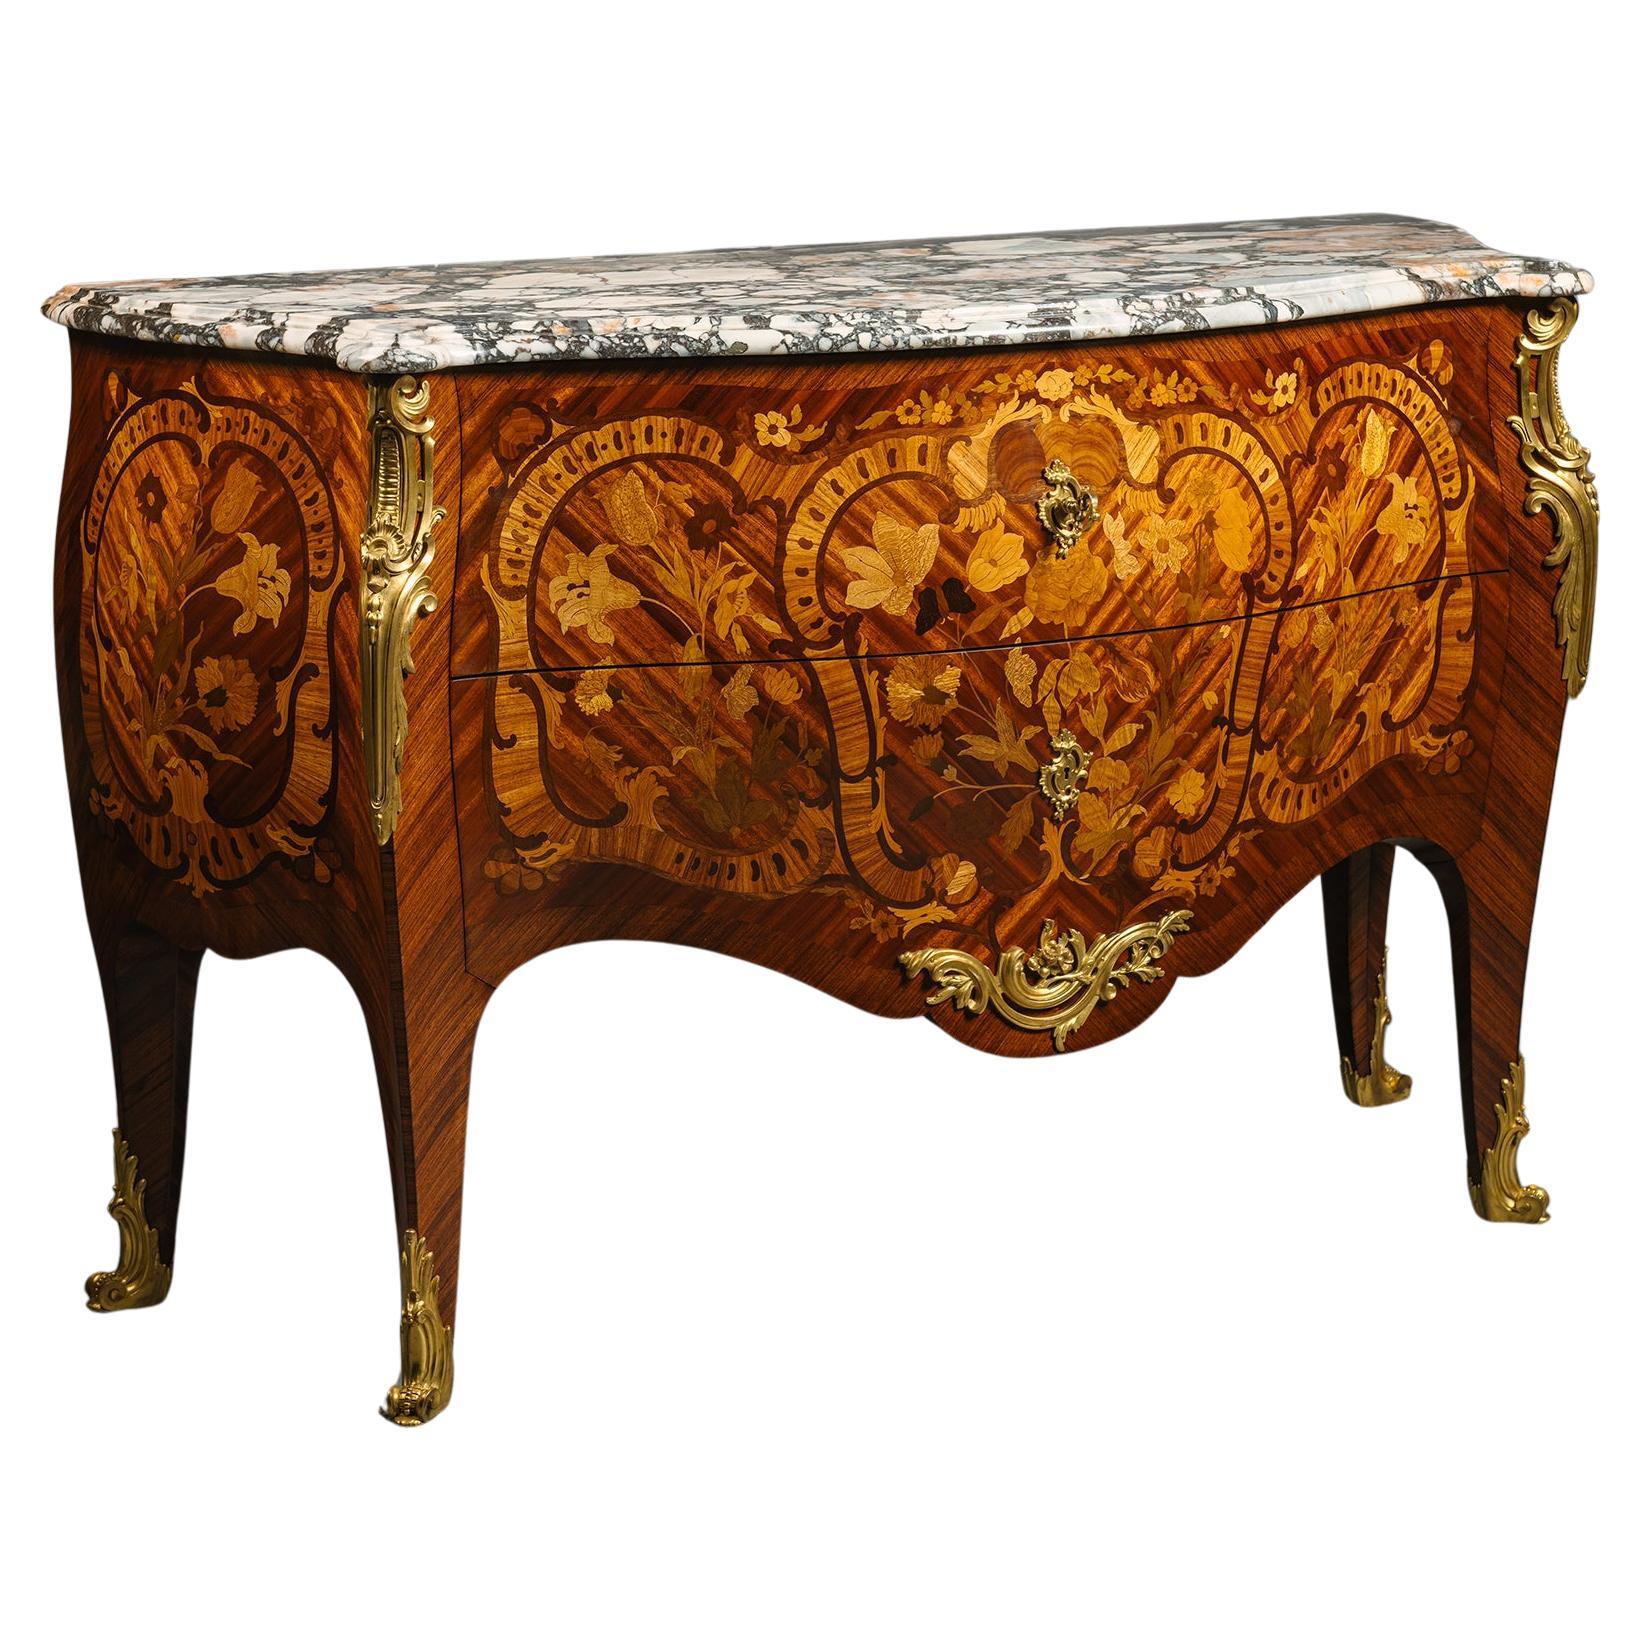 A Louis XV Style Gilt-Bronze Mounted Marquetry Commode, By Paul Sormani